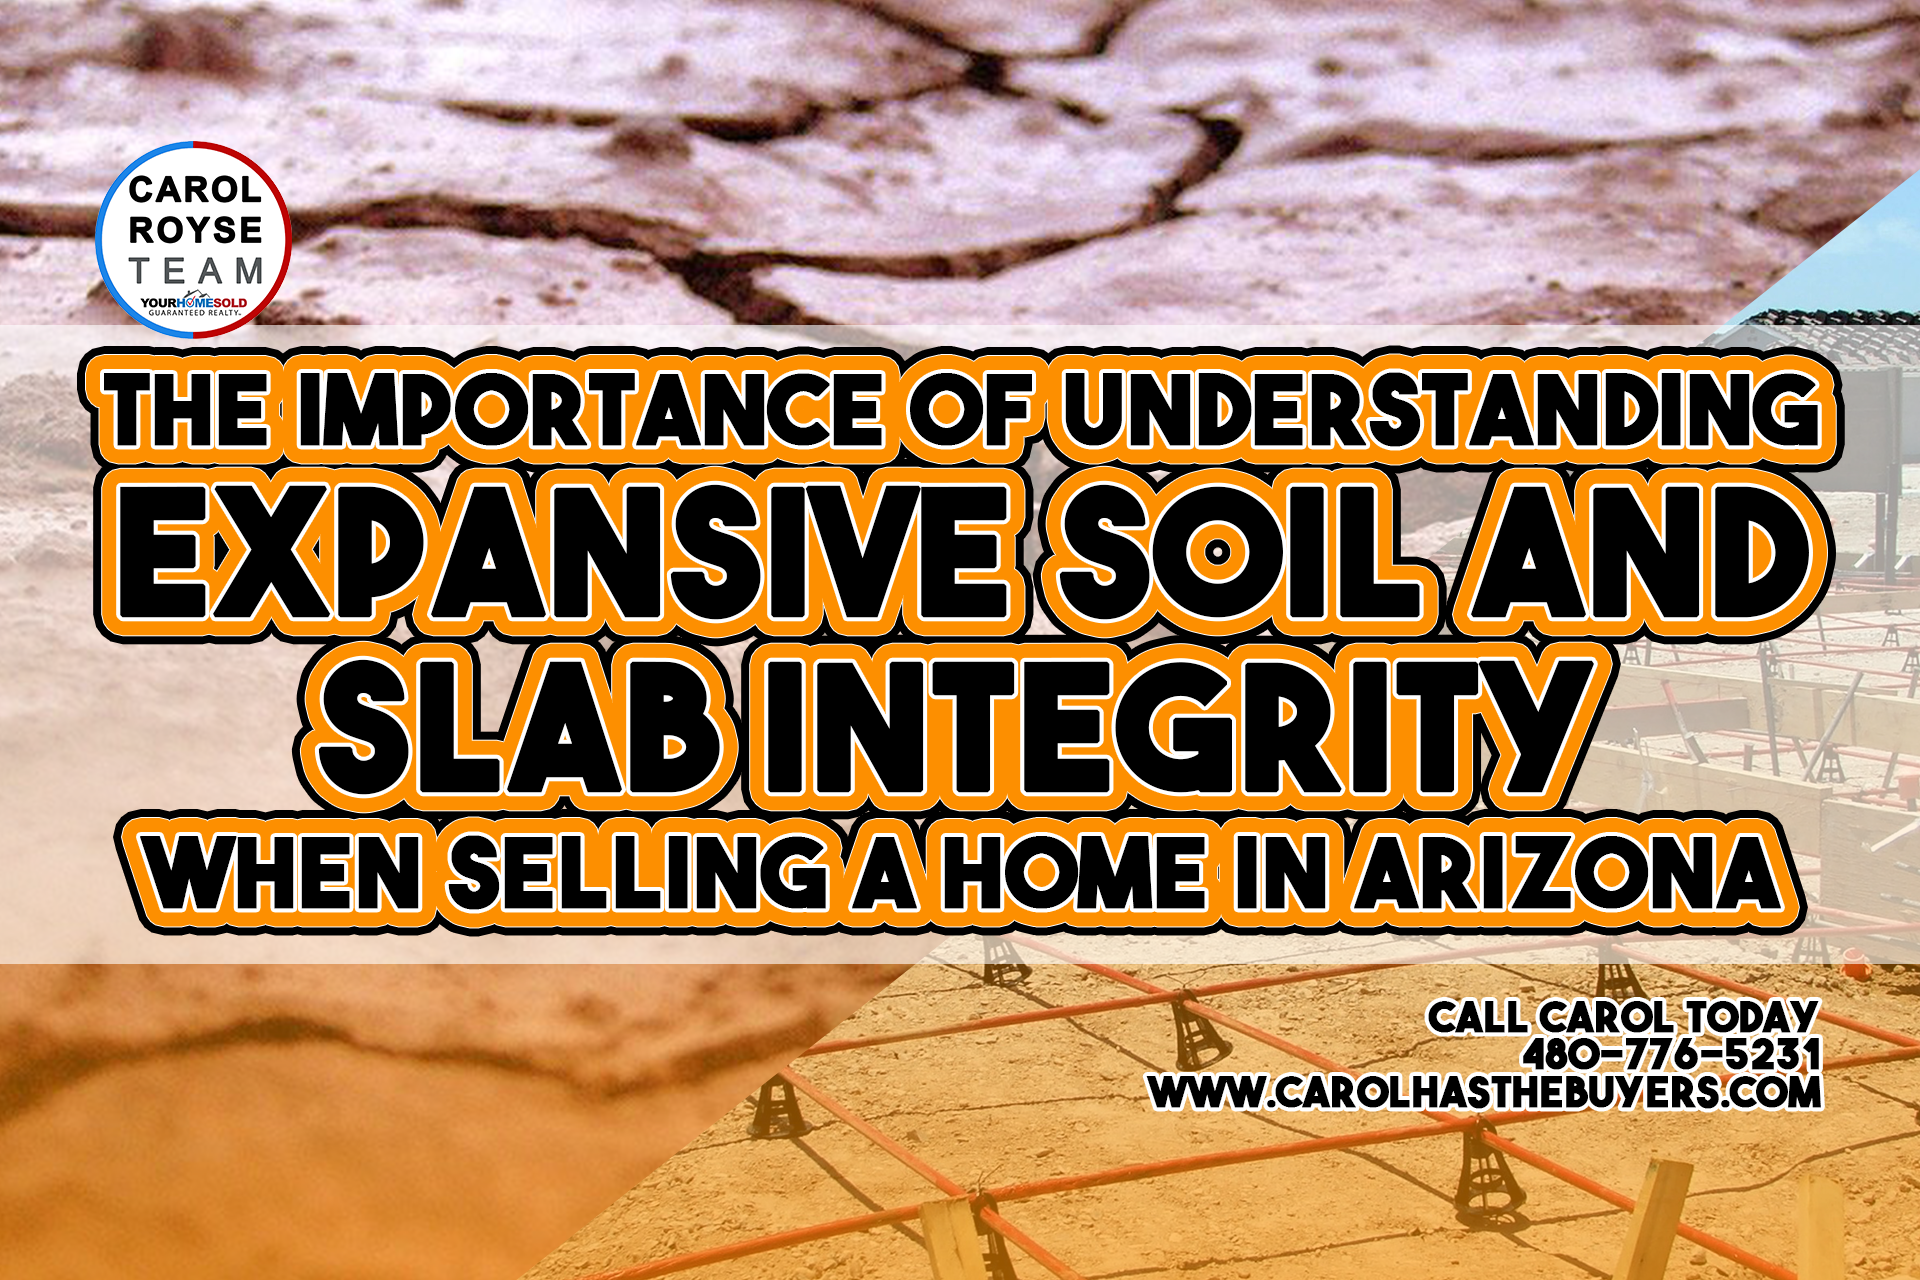 The Importance of Understanding Expansive Soil and Slab Integrity When Selling a Home in Arizona